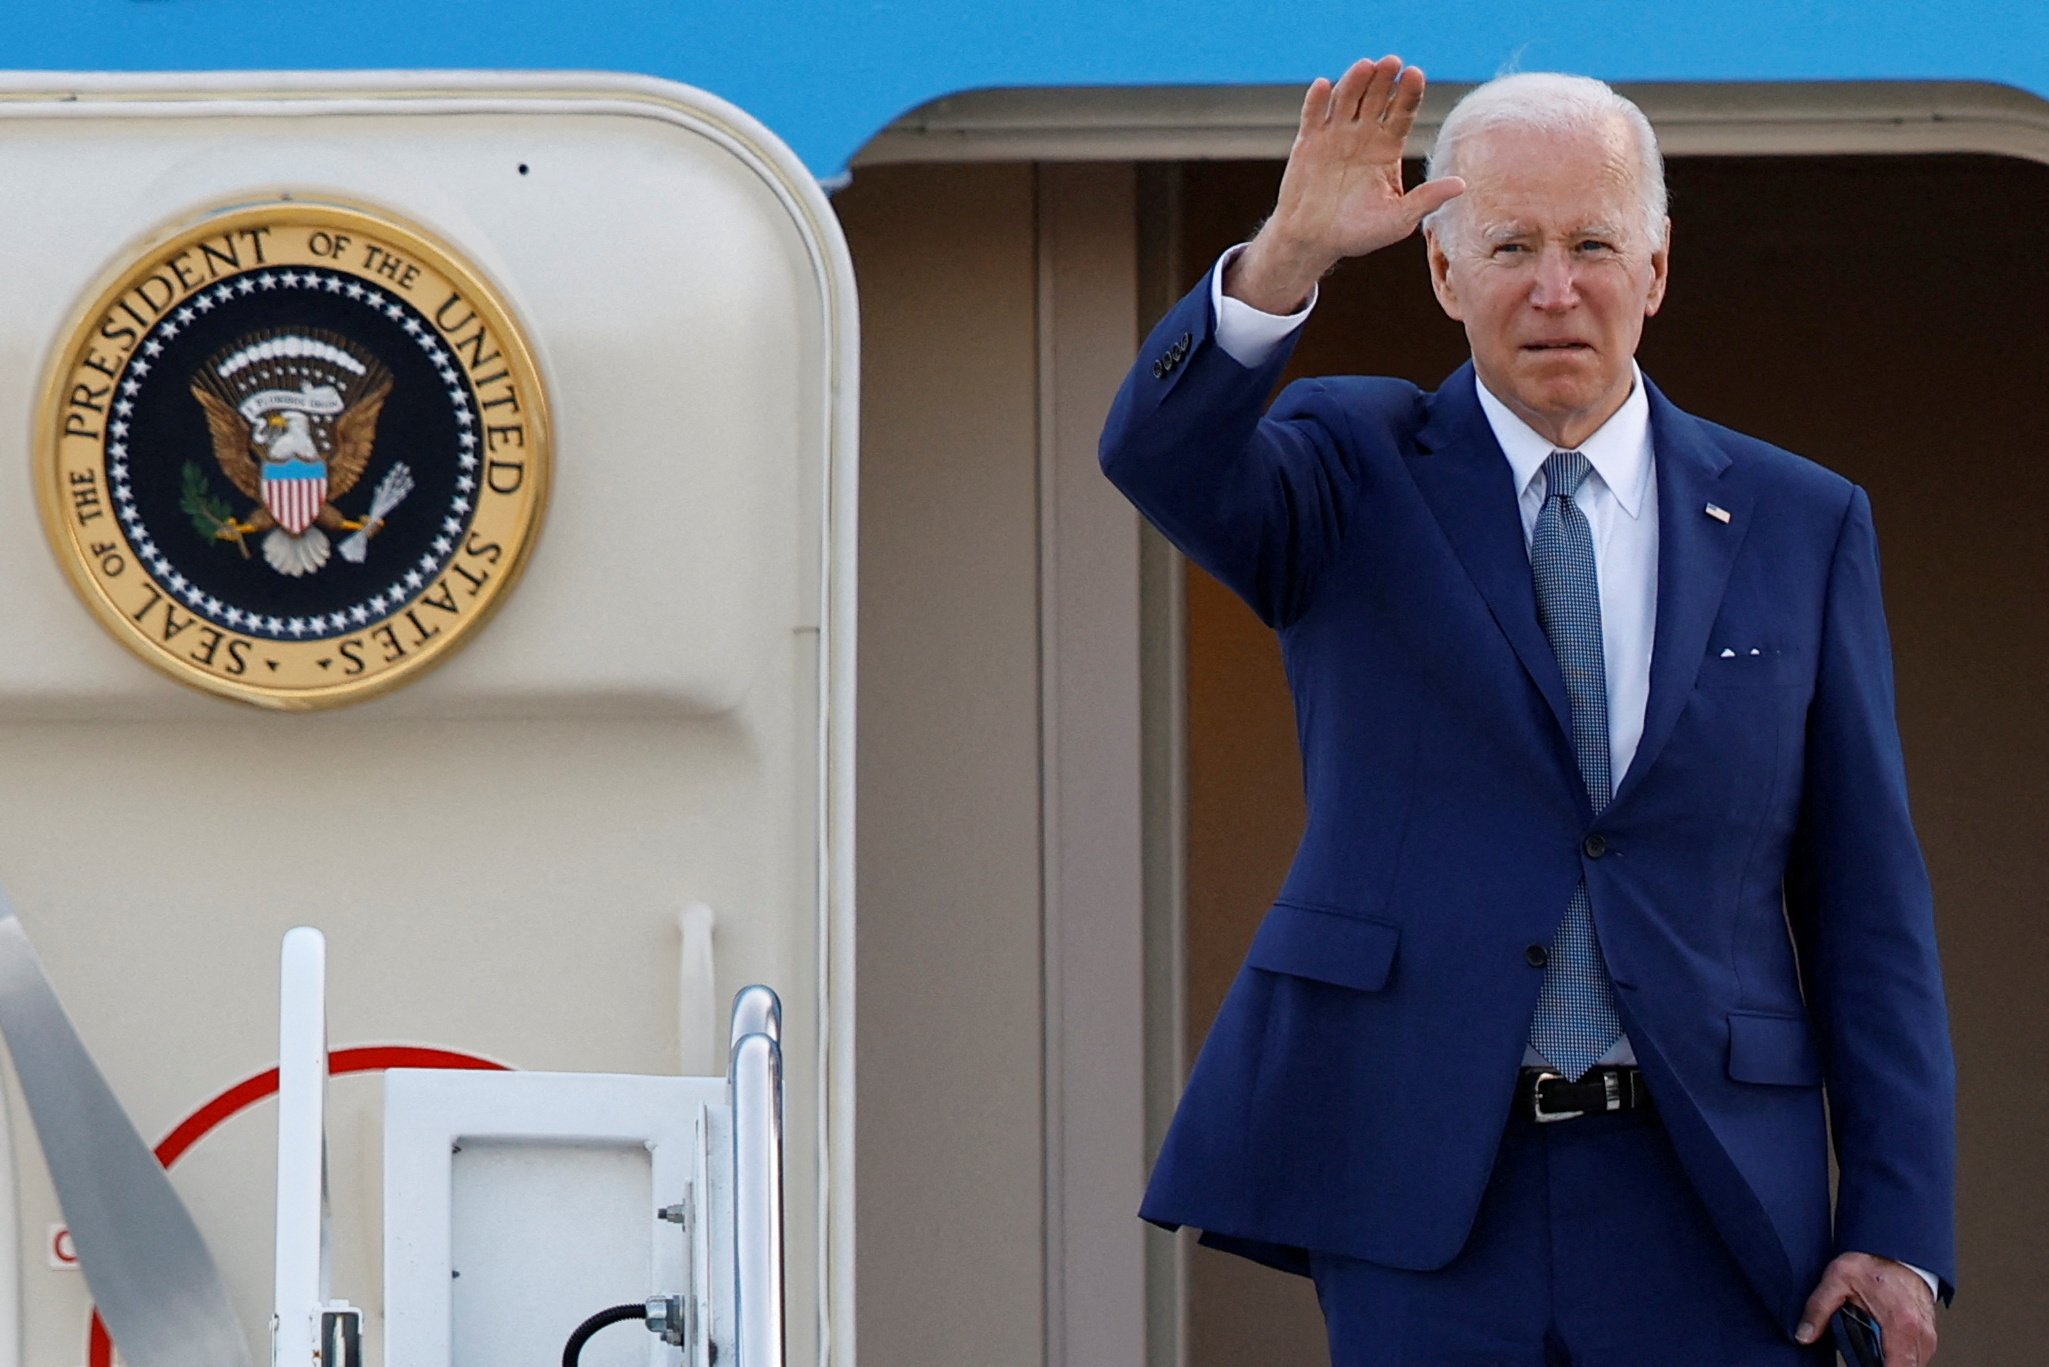 US President Joe Biden gestures as he boards Air Force One to depart from Yokota Air Base on the outskirts of Tokyo, on May 24. Photo: Reuters